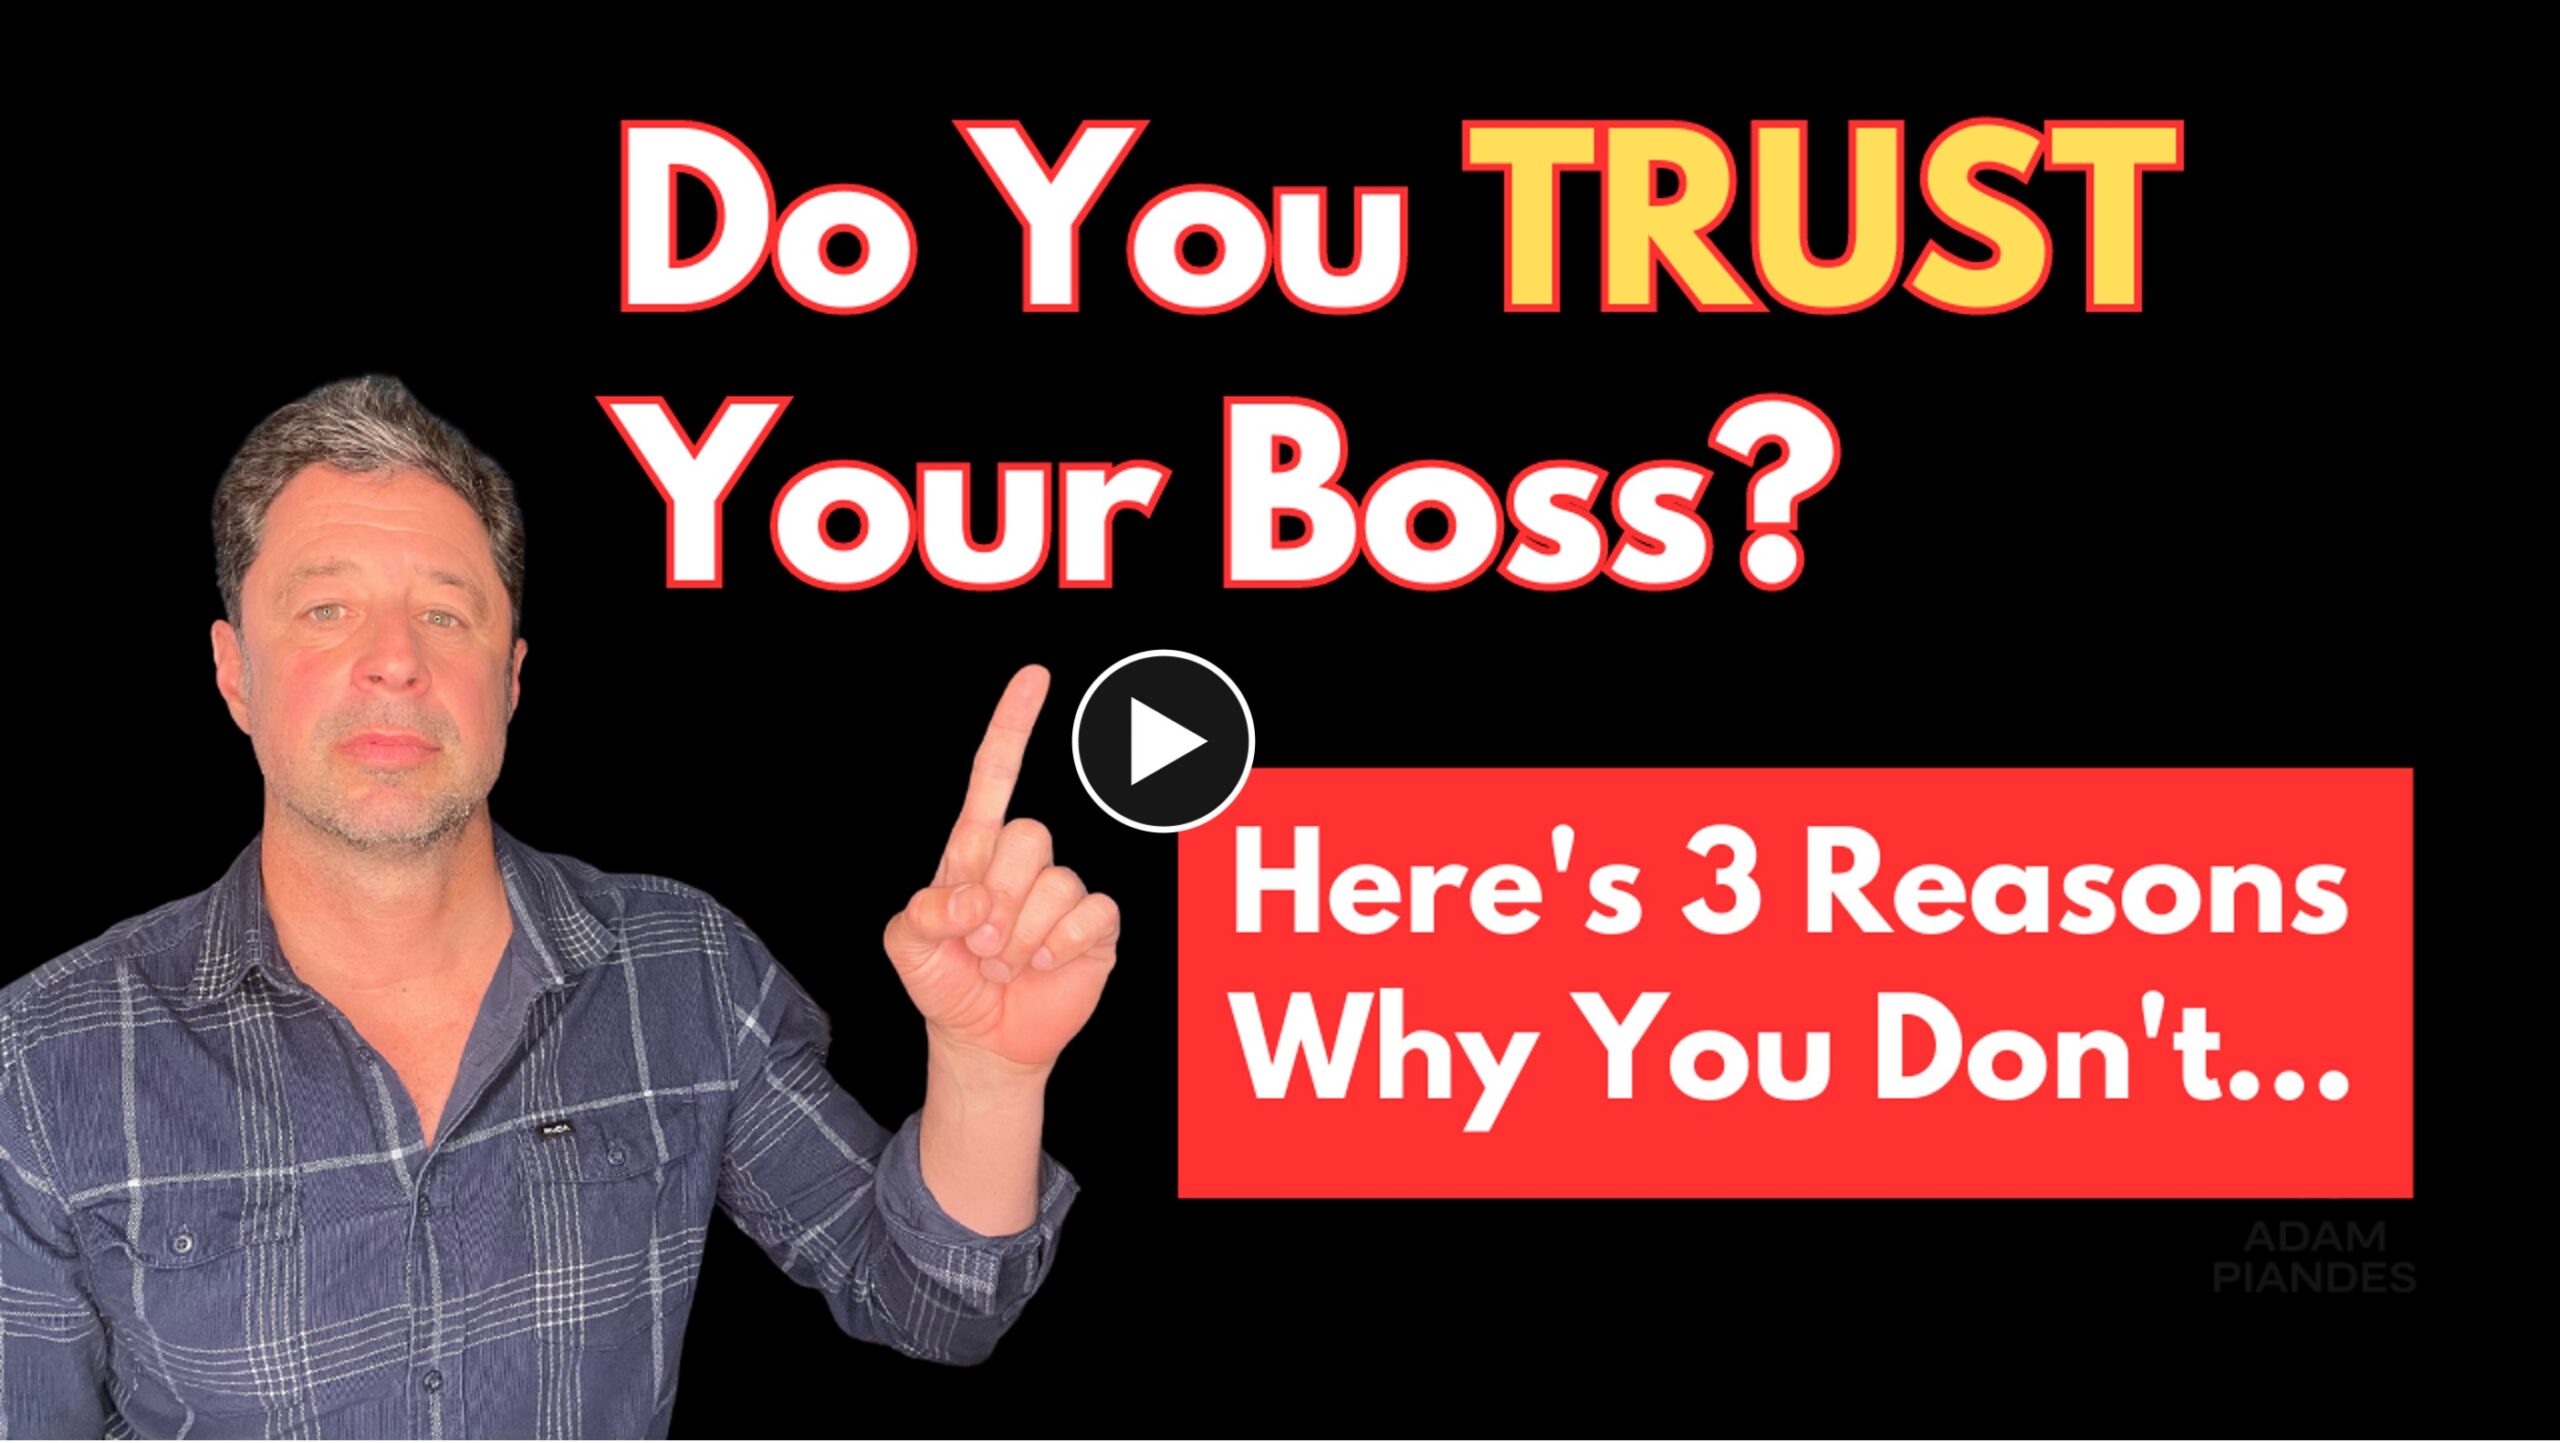 3 Reasons Why You Don't Trust Your Boss